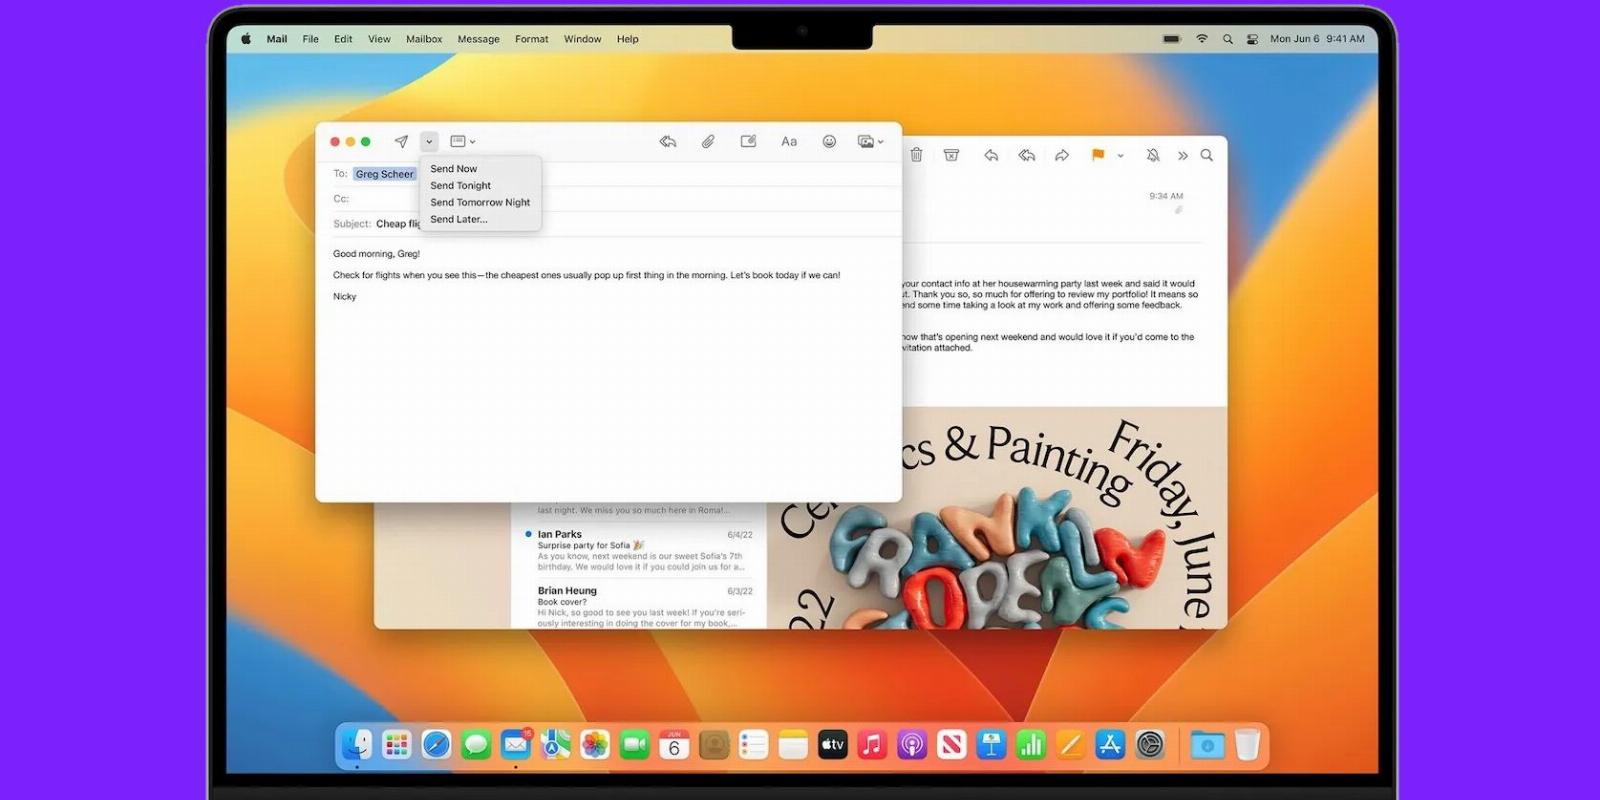 5 Reasons to Use Apple’s Mail App on Your Mac